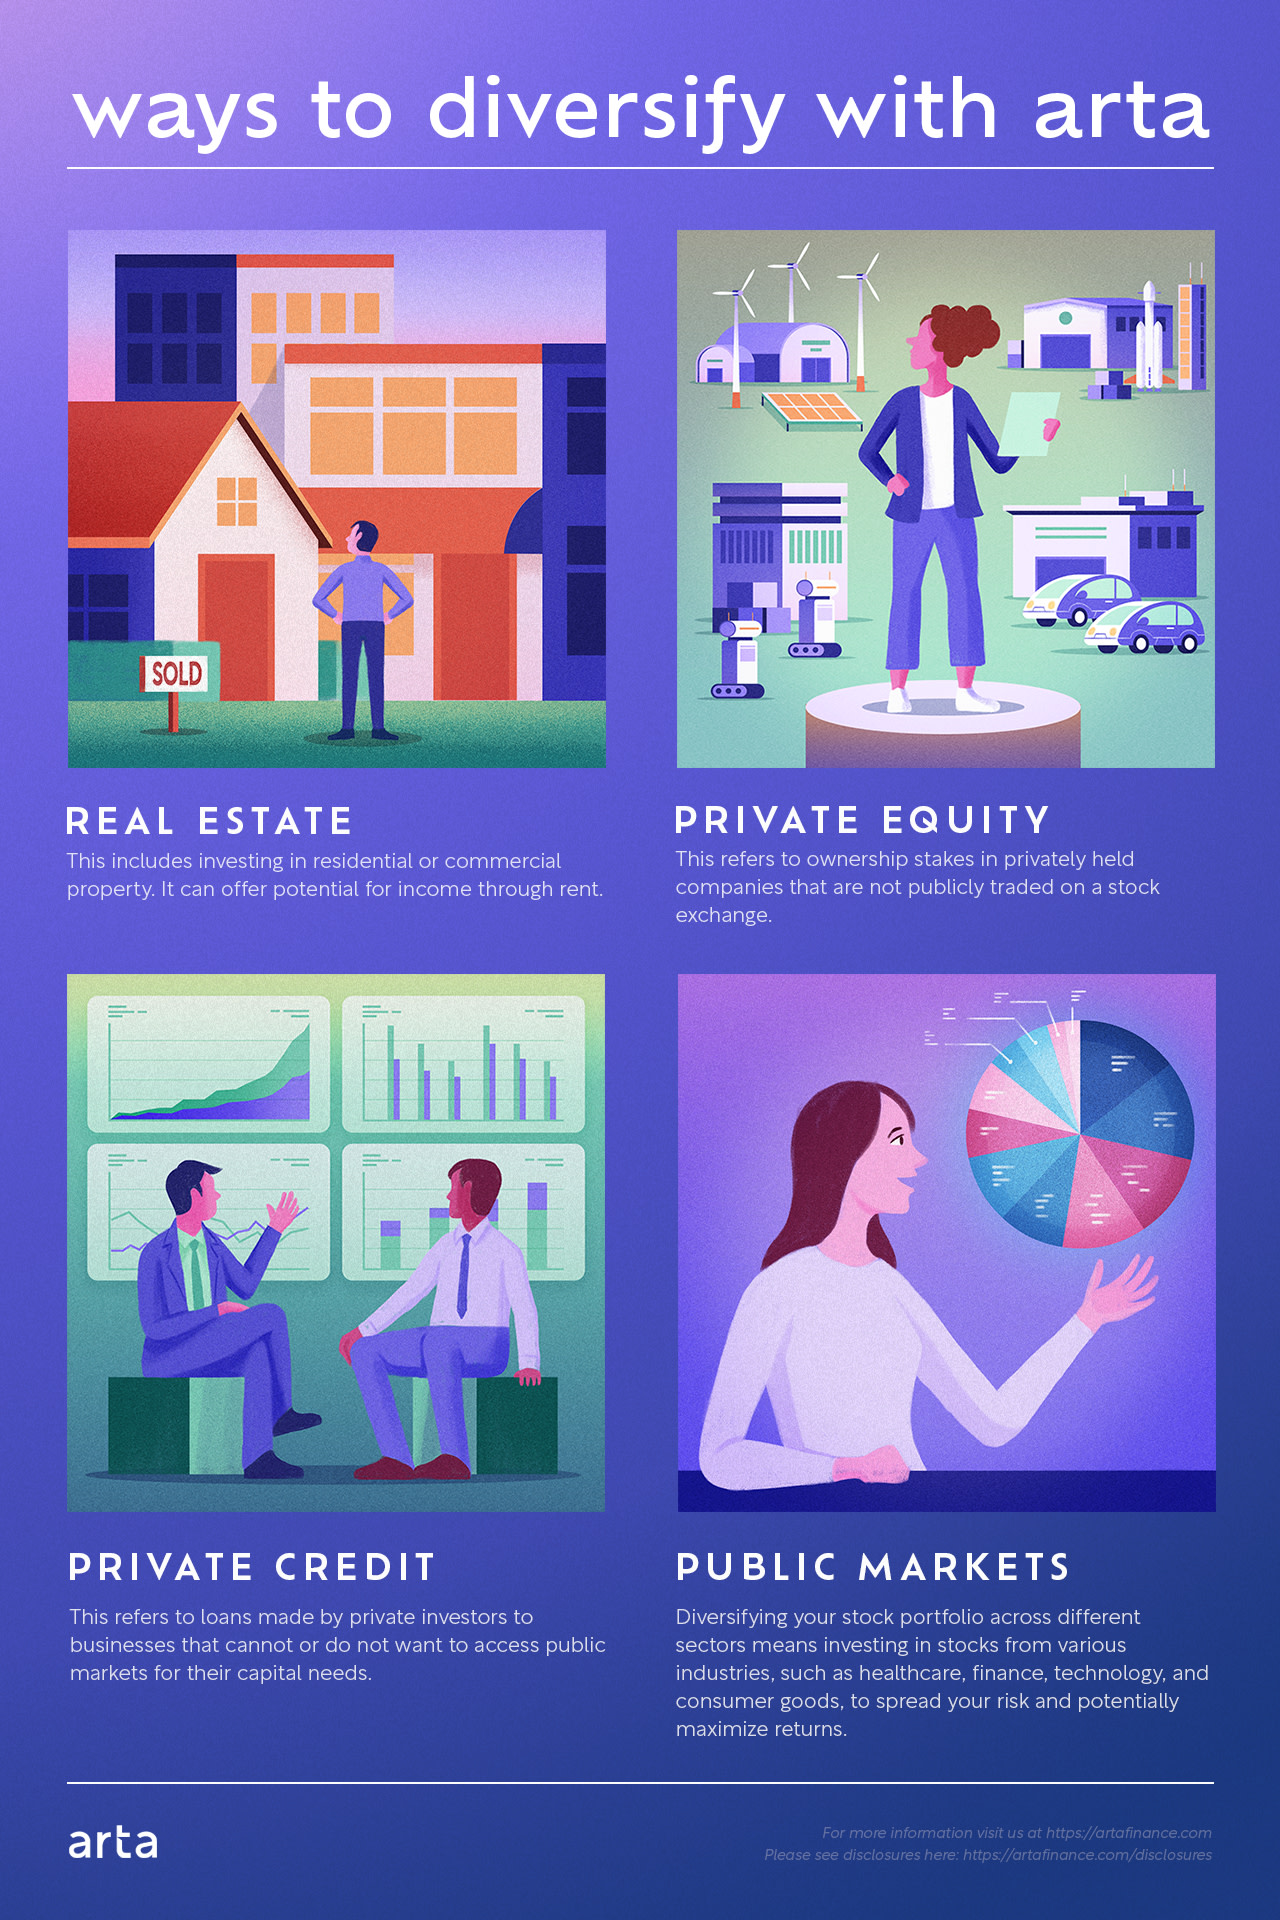 insider-education-06-diversification-infographic